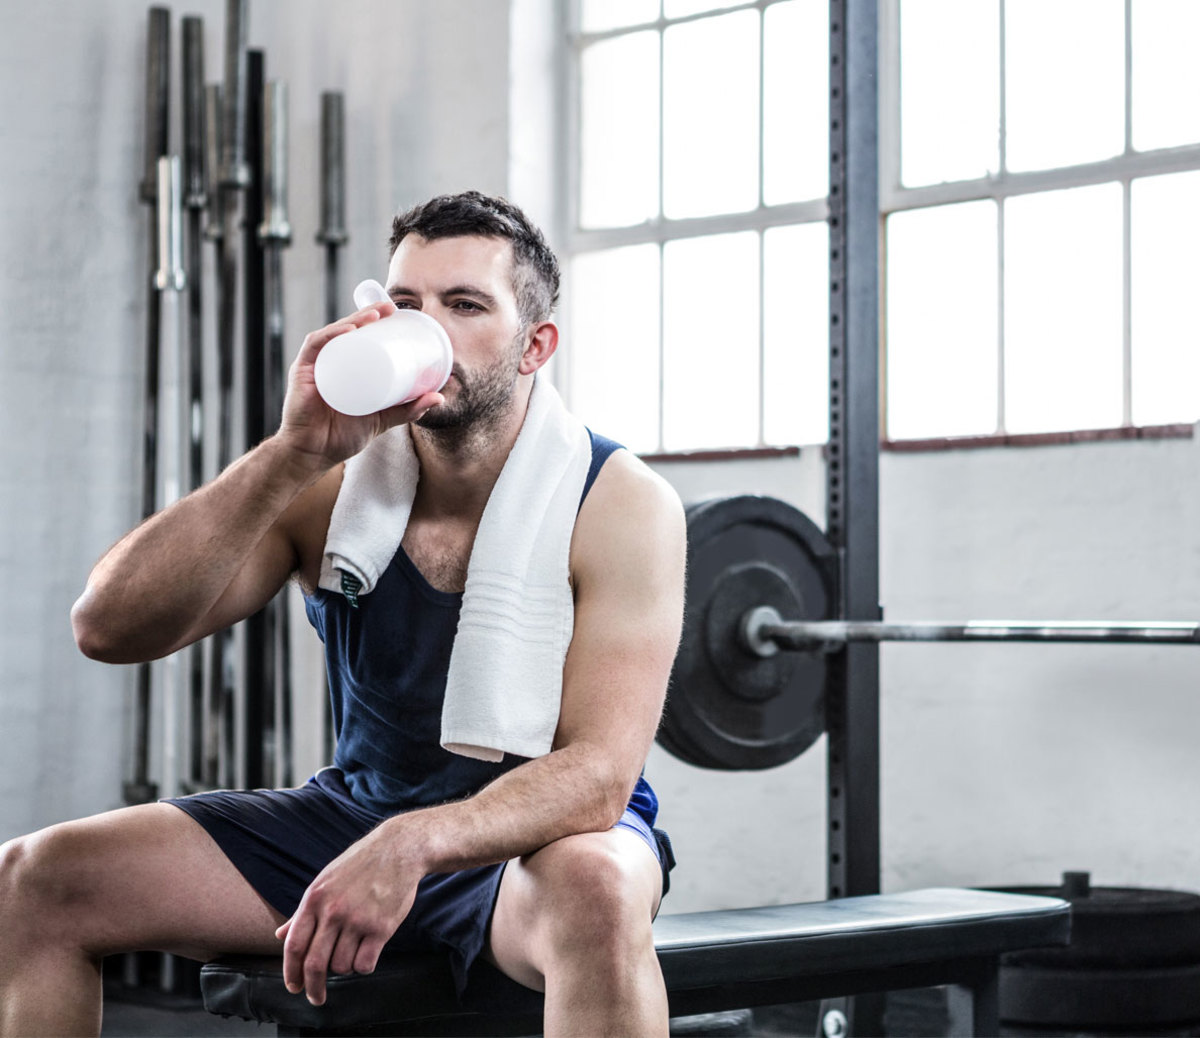 When To Drink Protein Shakes: Before or After Your Workout